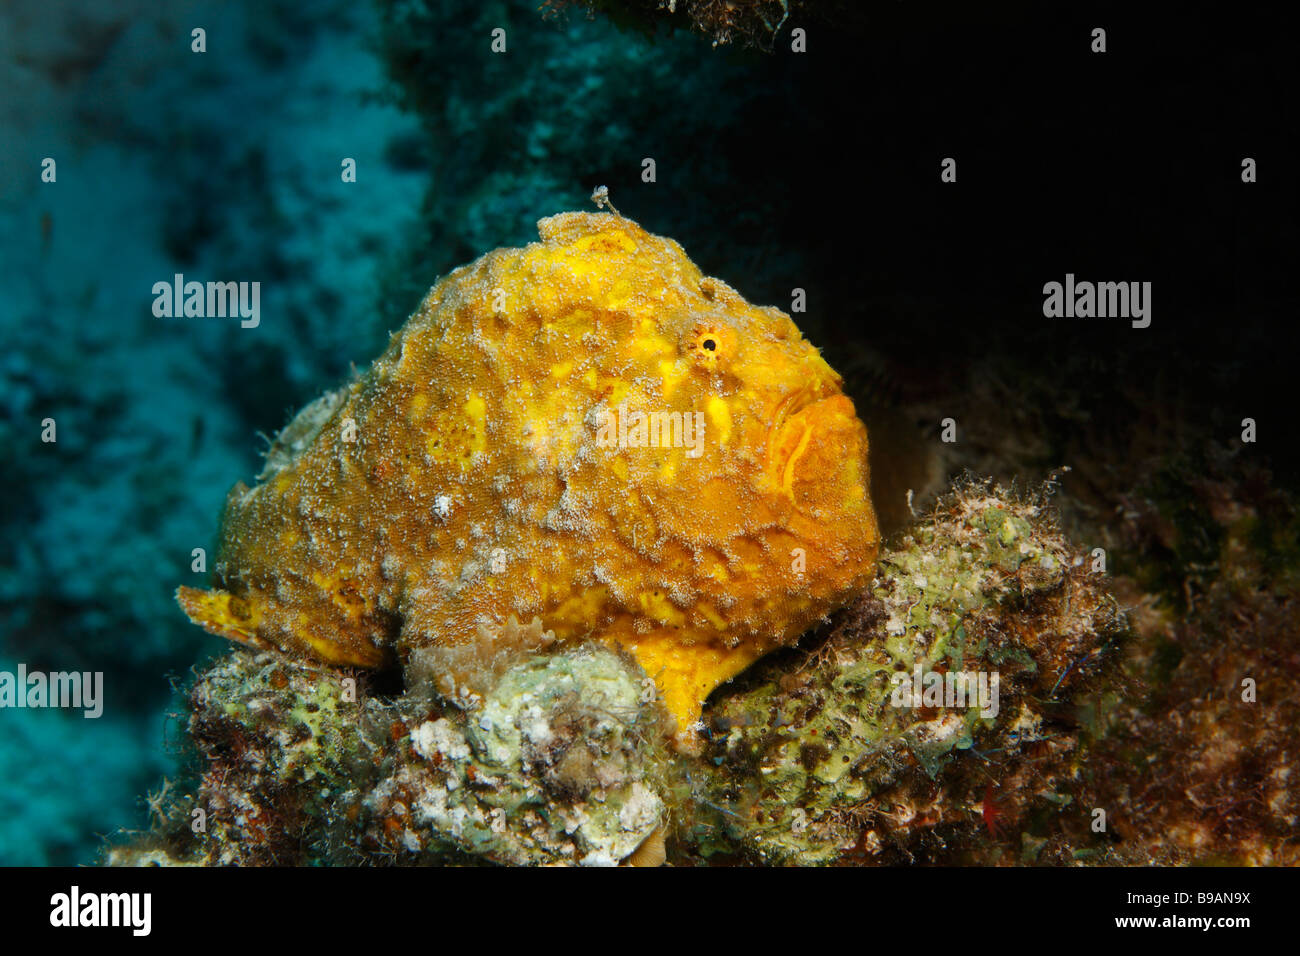 Longlure Frogfish Antennarius multiocellatus yellow colored perched on coral Stock Photo